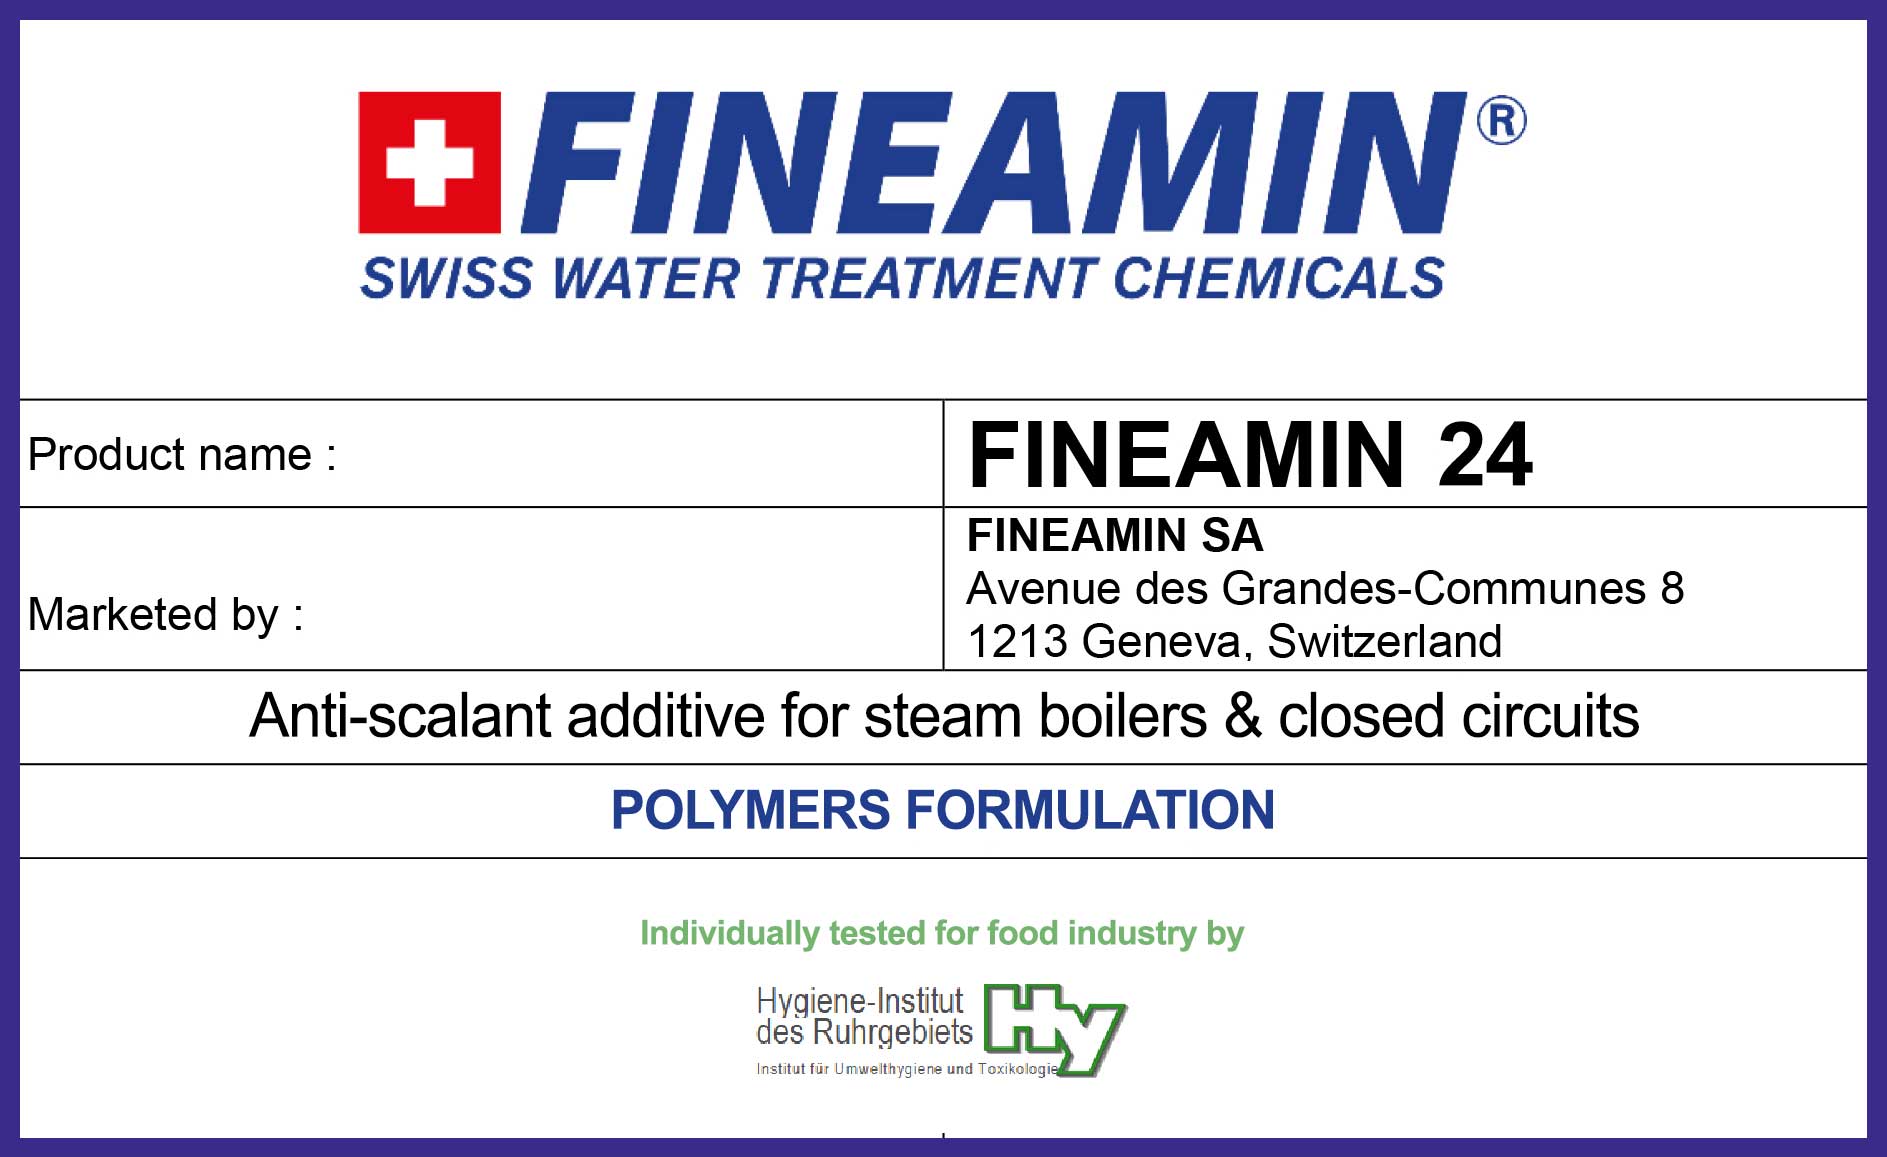 Fineamin 24 boiler additive dispersing scale polymers label